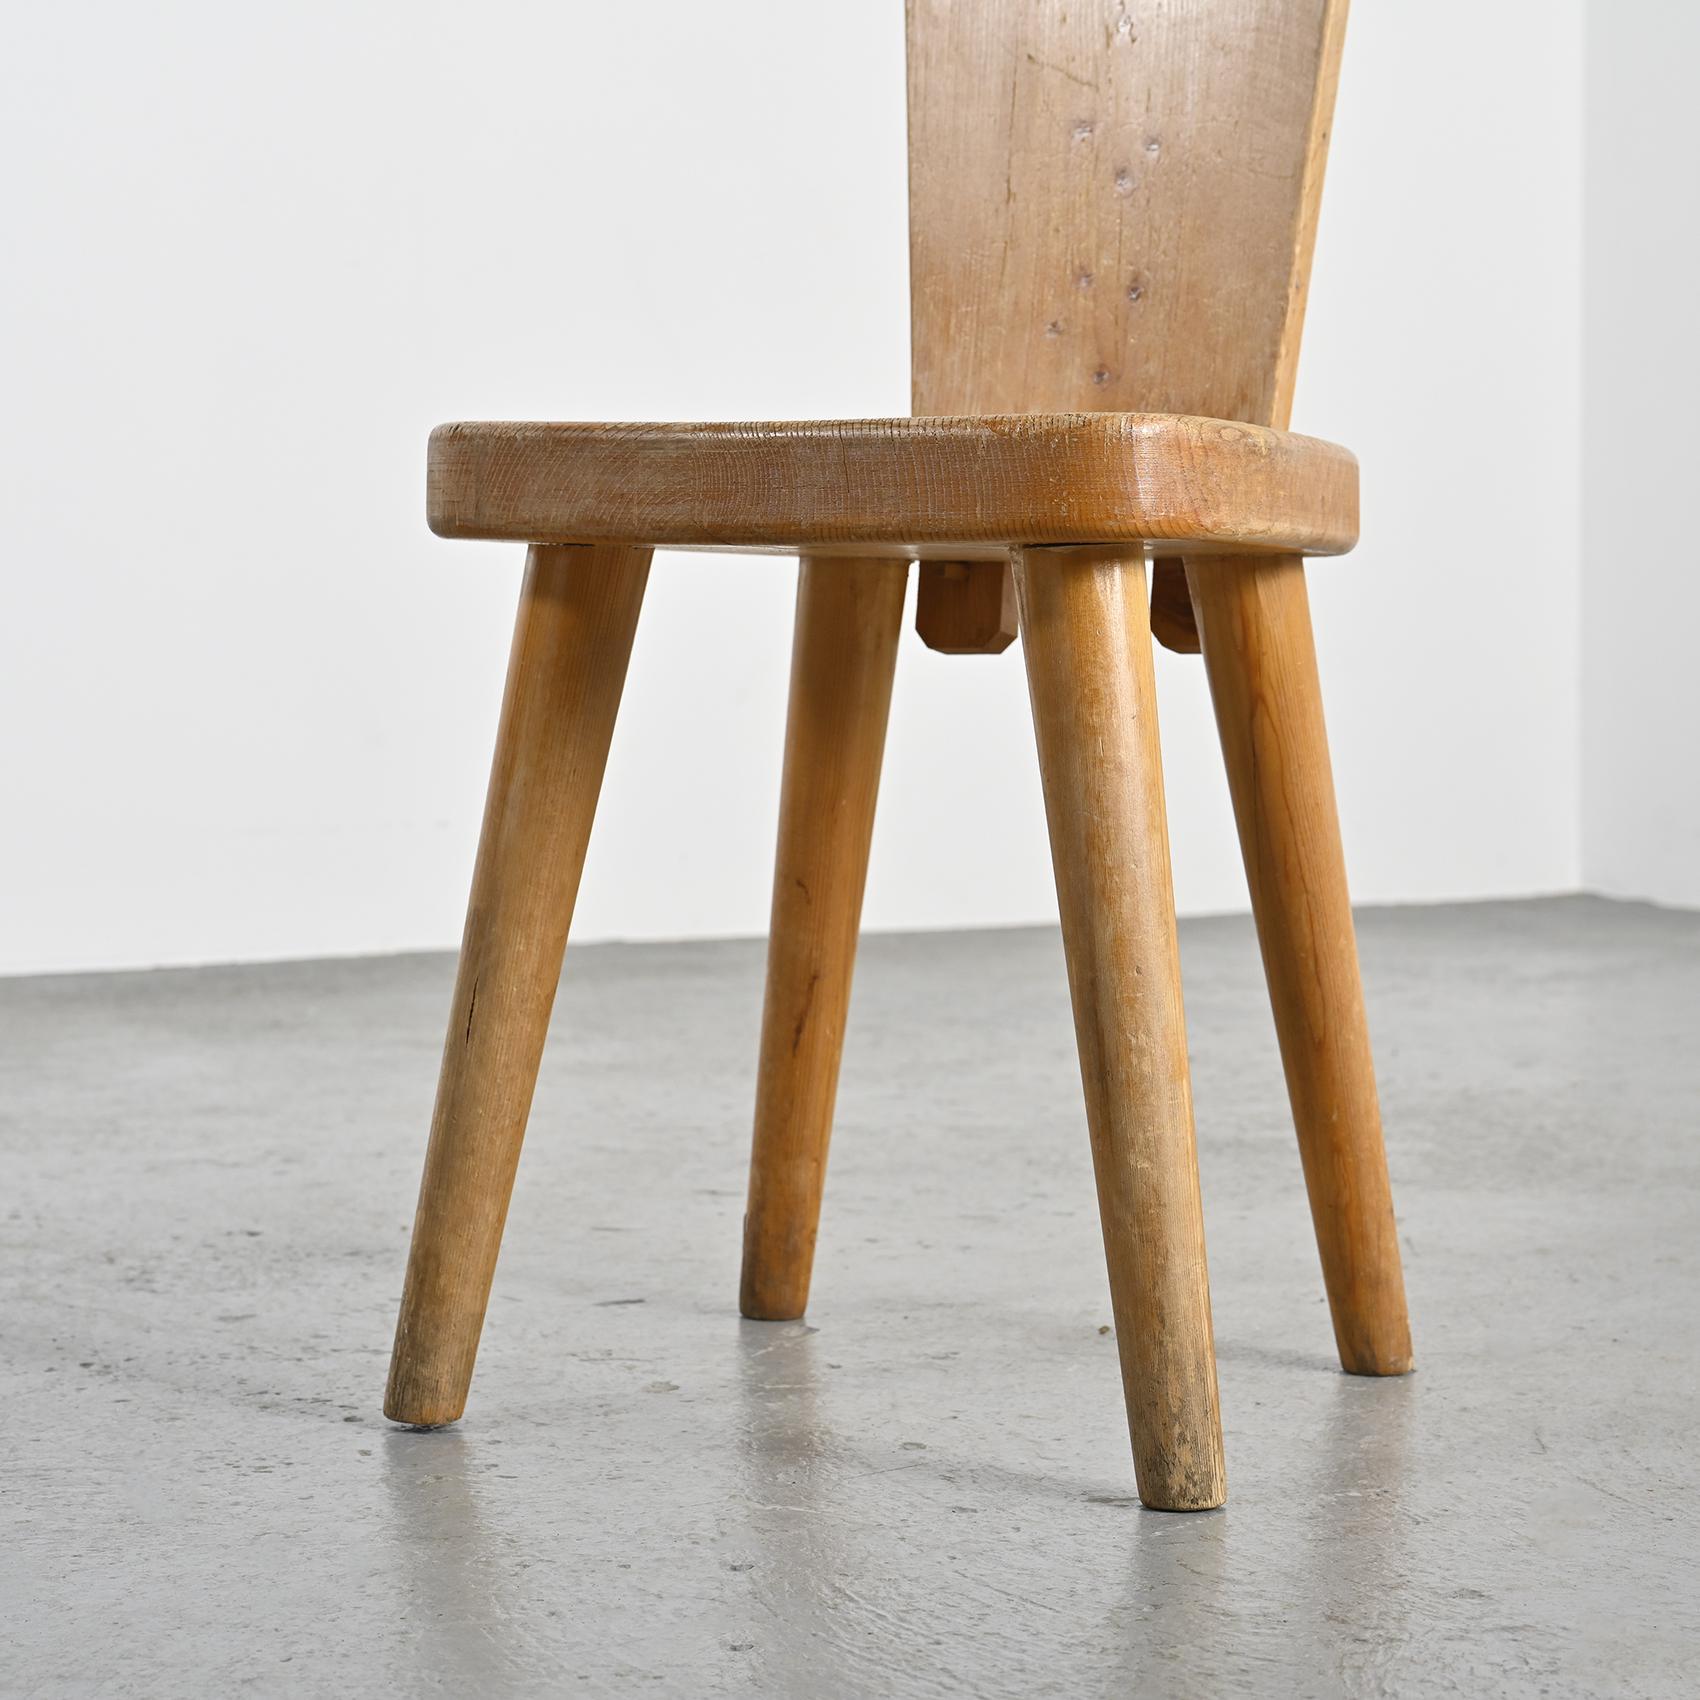 Solid Pine Chair by Christian Durupt, Meribel 1960 For Sale 1